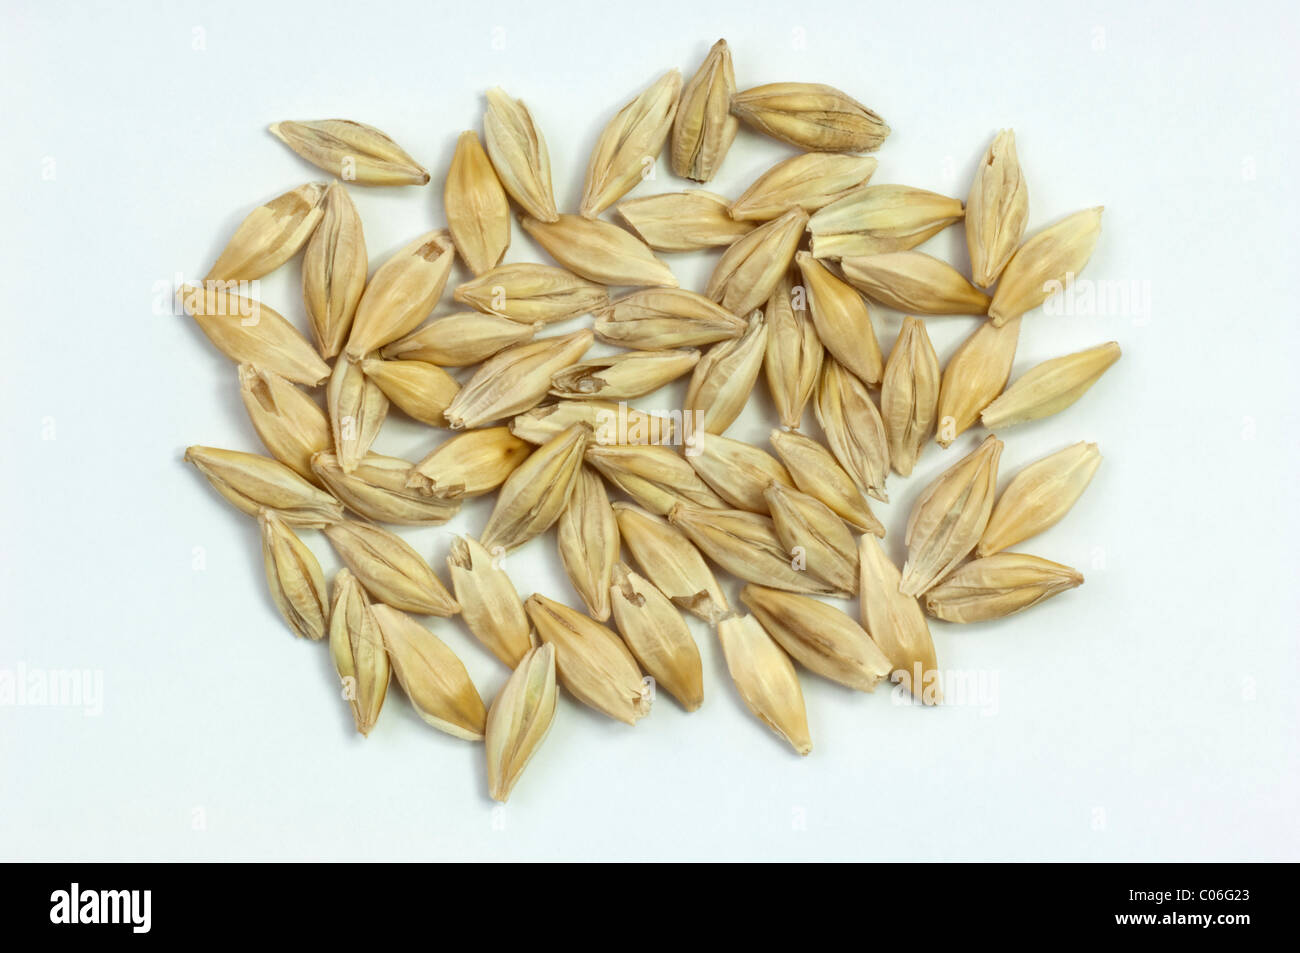 Six-row Barley (Hordeum vulgare f. hexastichon), corns. Studio picture against a white background. Stock Photo